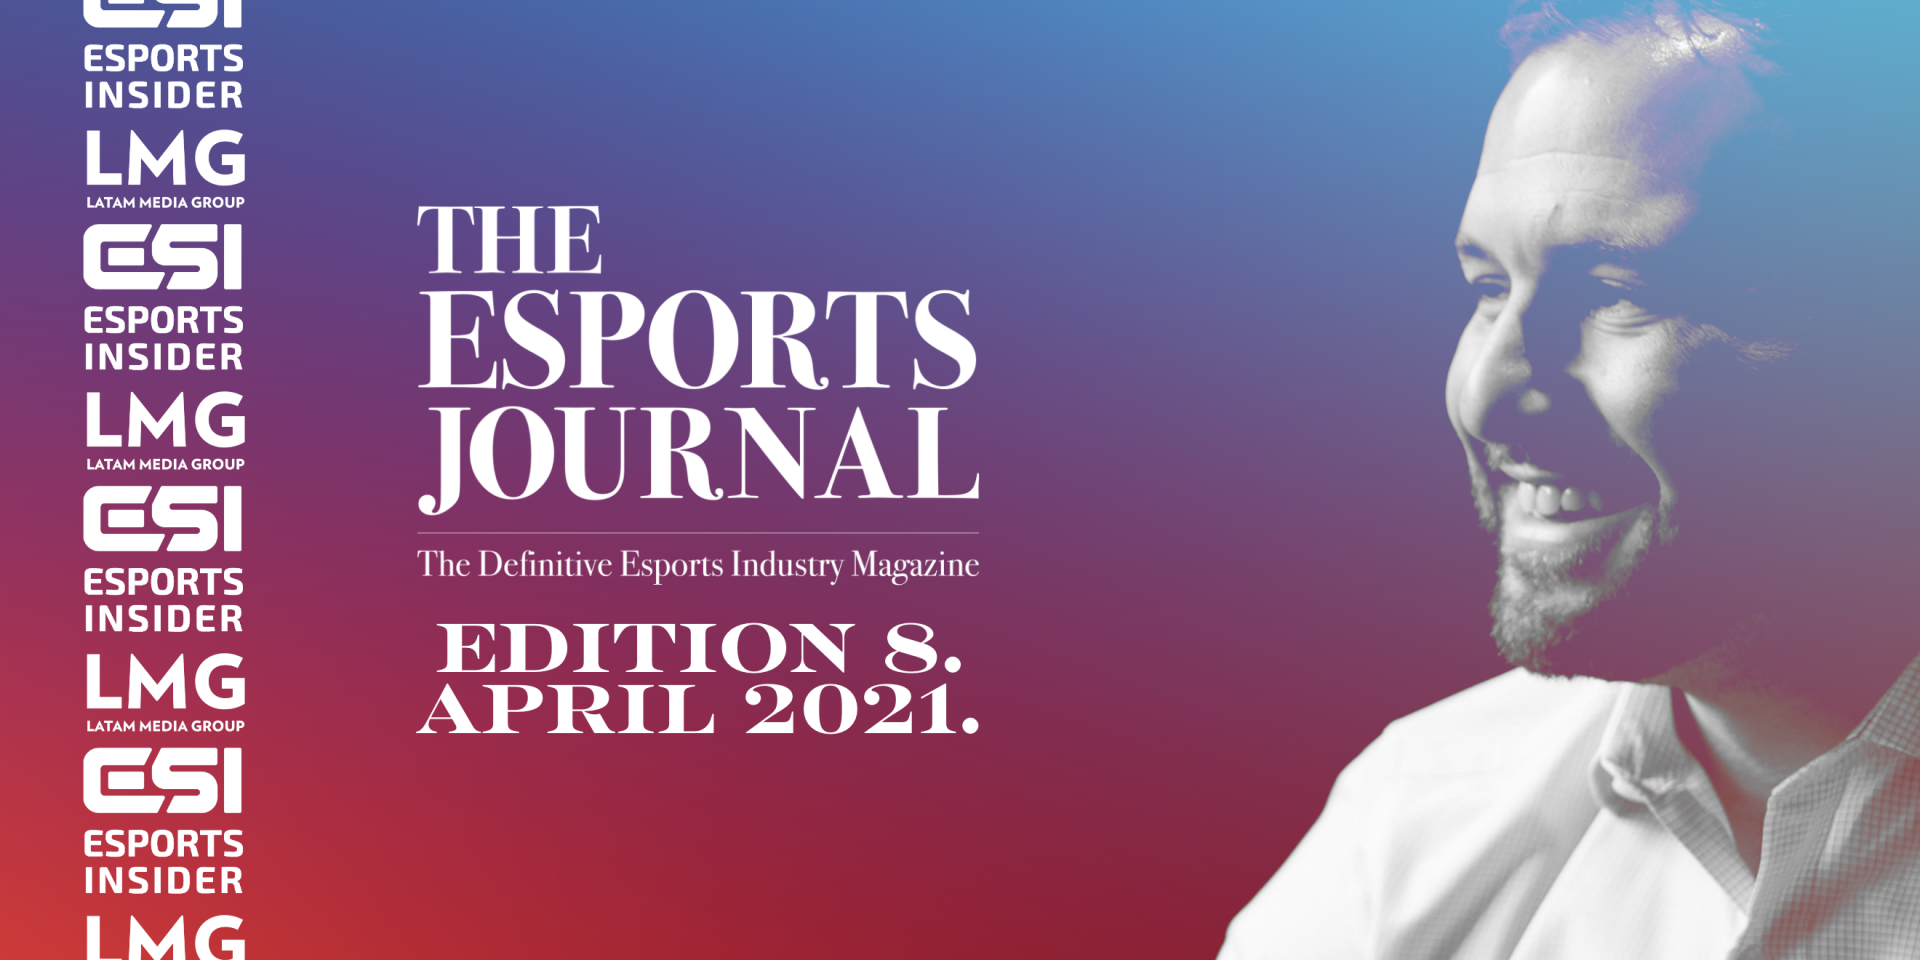 The Esports Journal Edition 8